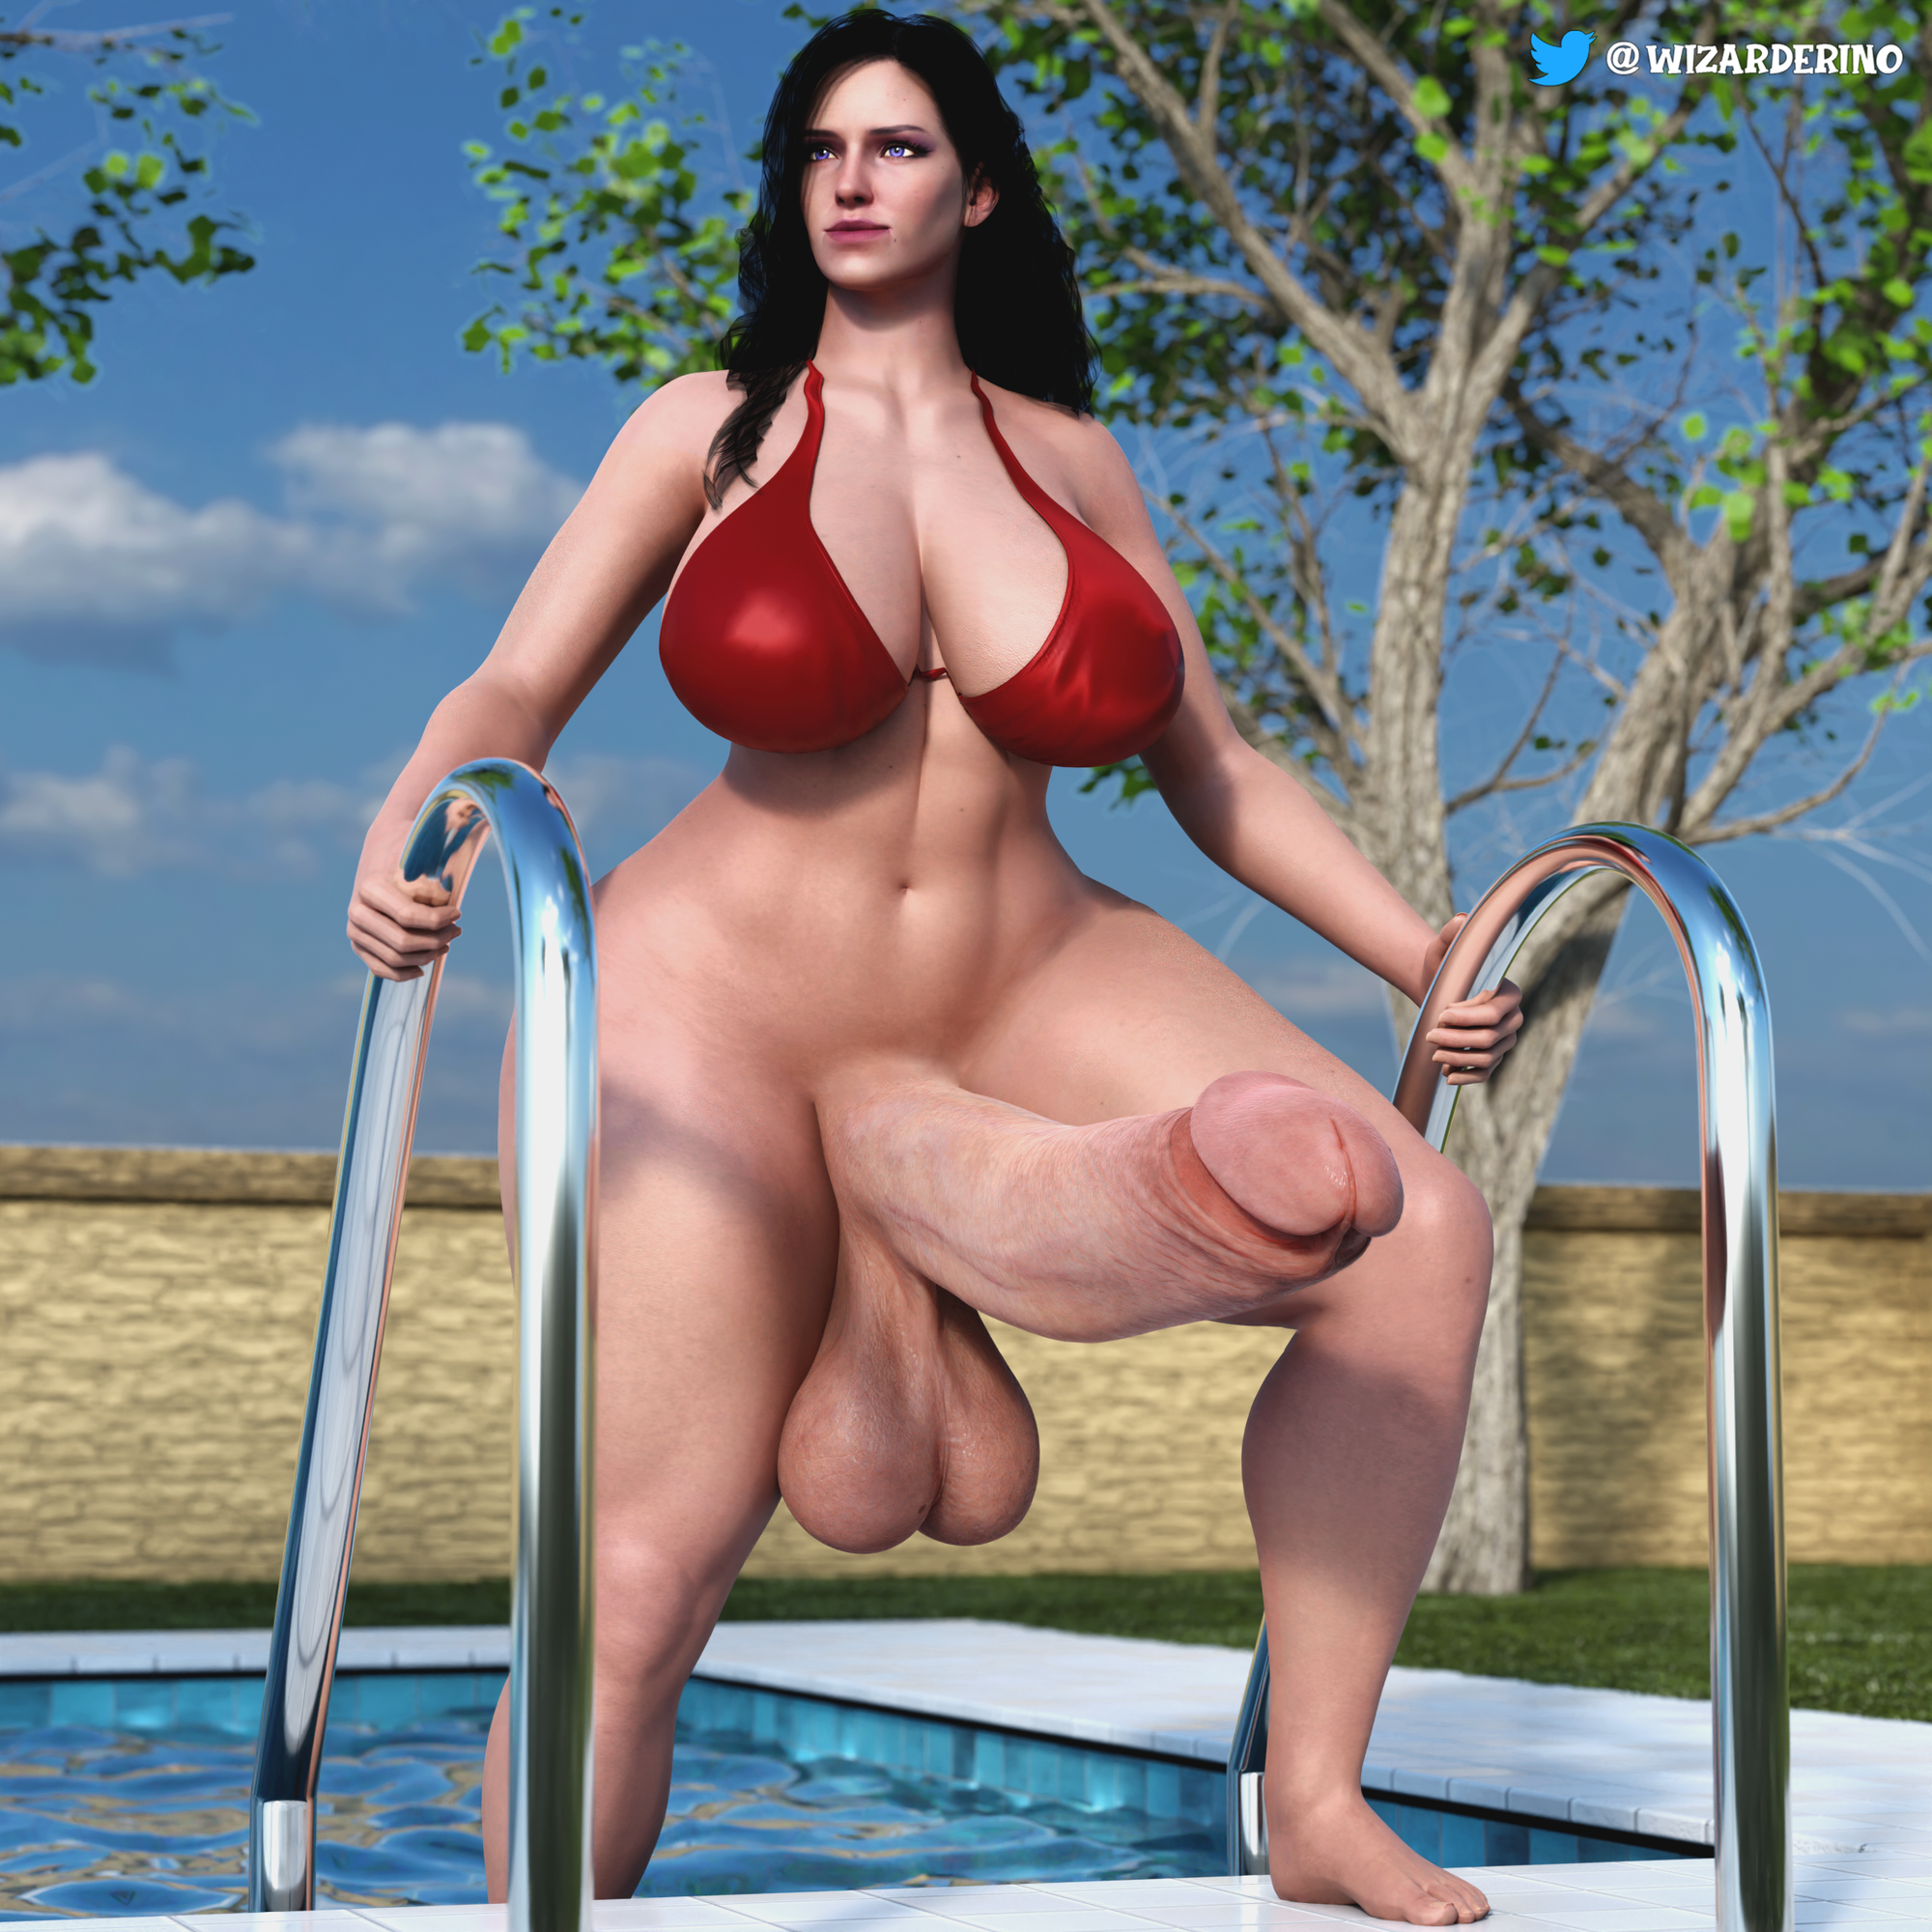 Yen at the pool, wanna join her ?